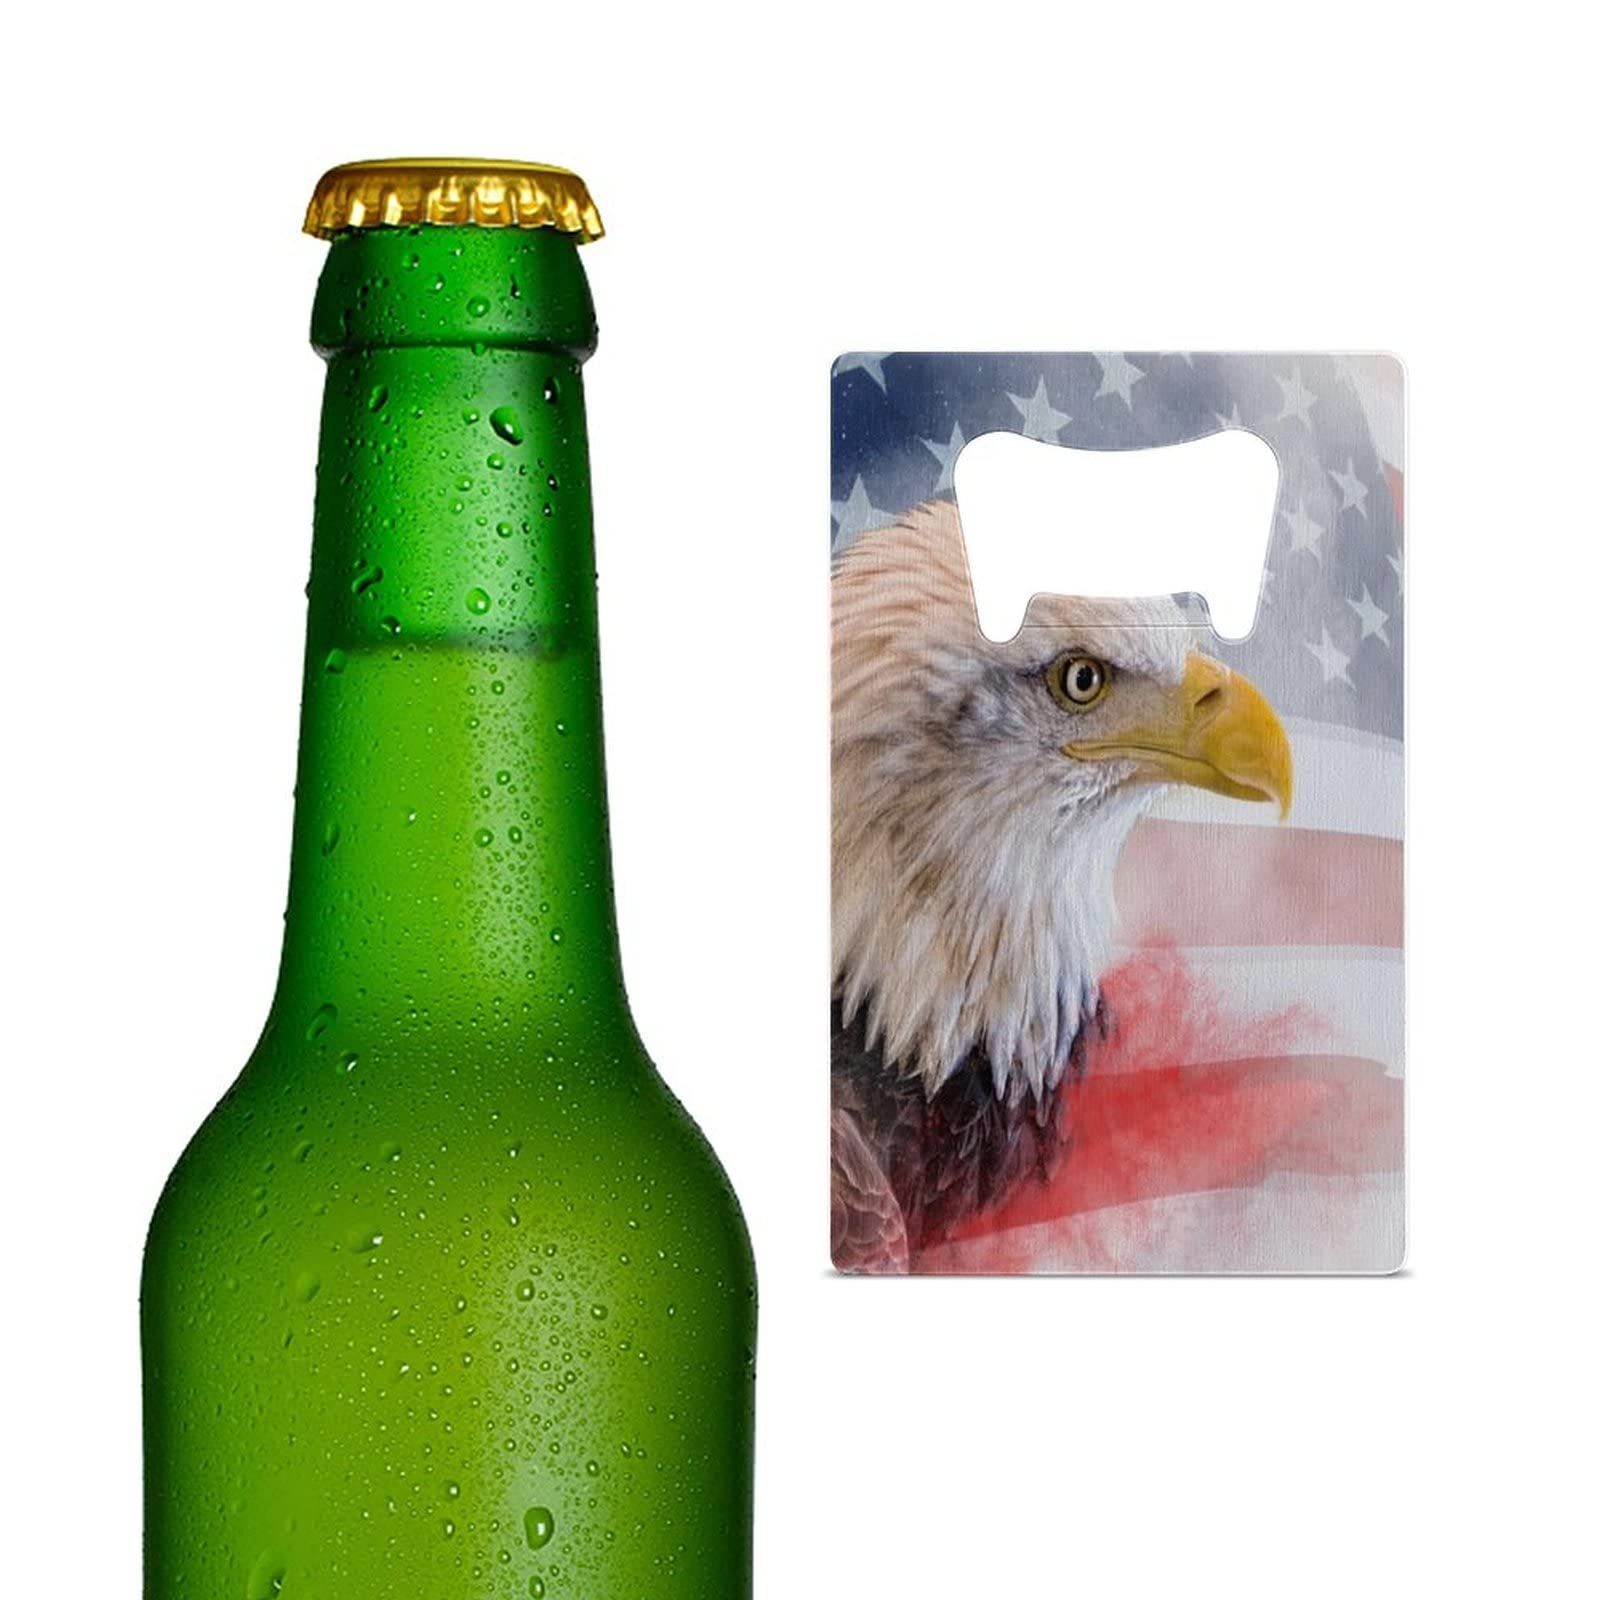 Bald Eagle with American Flag Stainless Steel Beer Bottle Opener Pop Can Soda Openers Gift for Dad Husband Him Credit Card Size